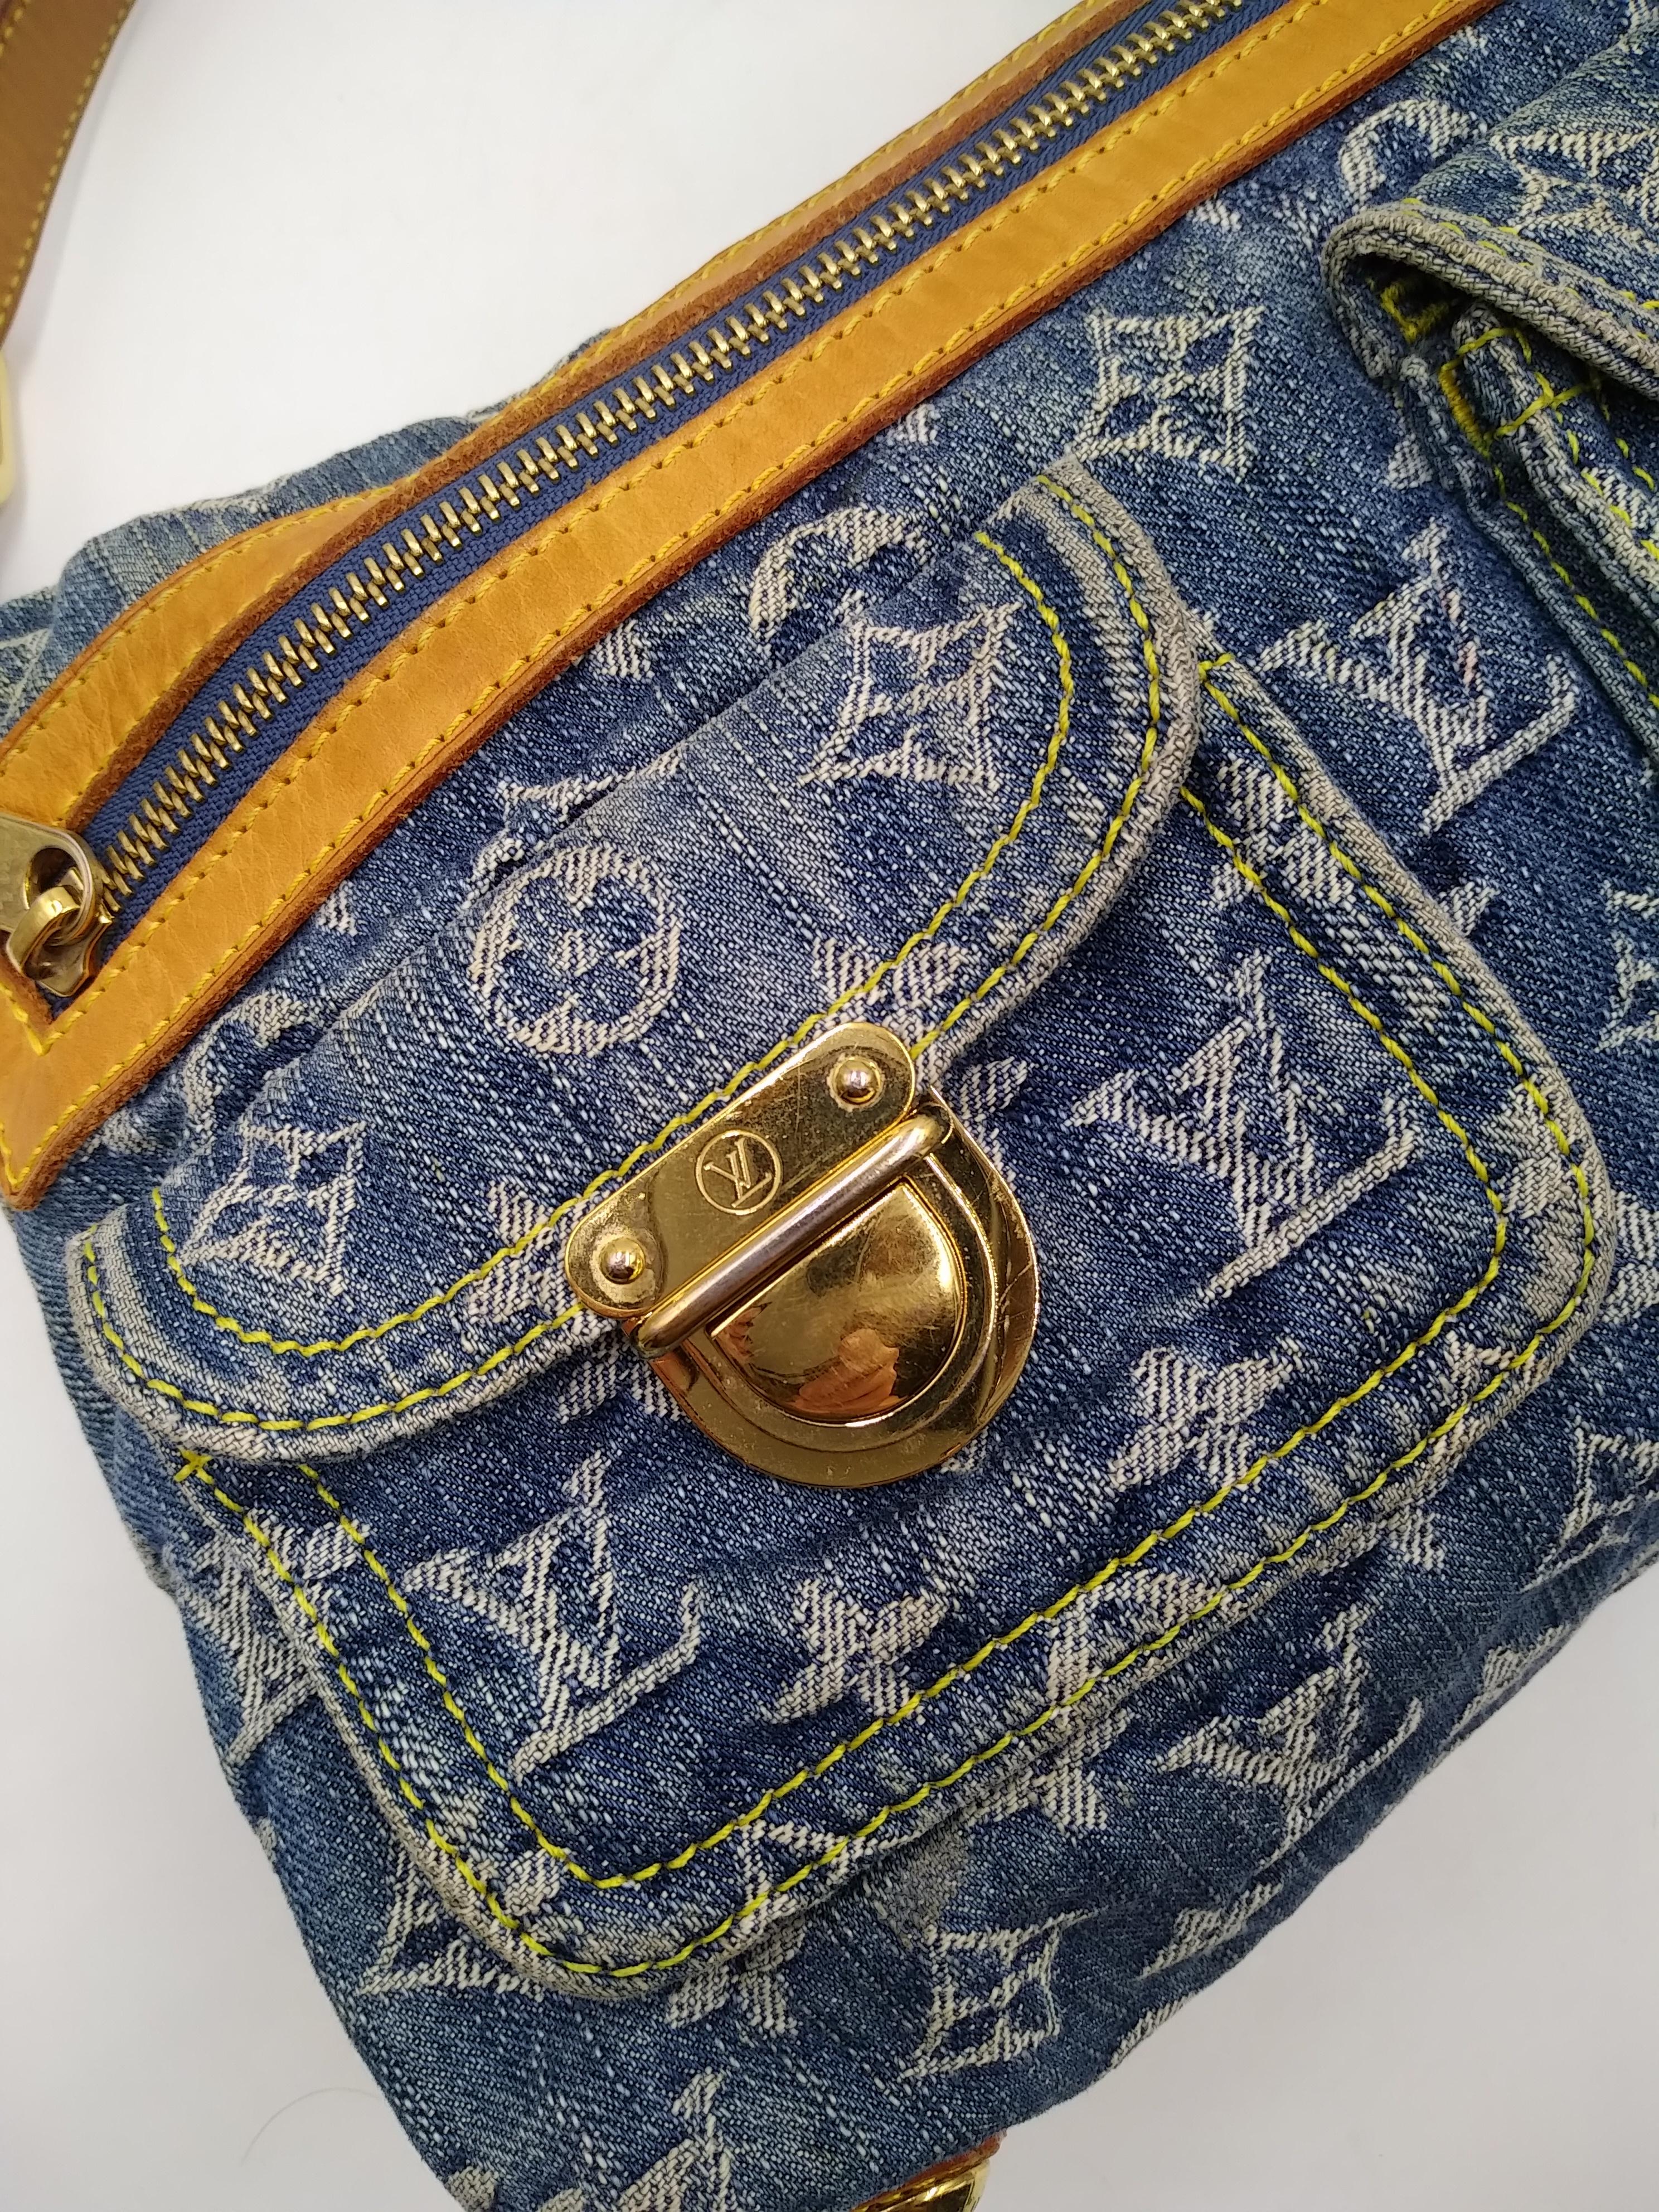 Louis Vuitton Denim Monogram Baggy PM Bag, 2008
- 100% authentic Louis Vuitton
- Blue monogram denim
- Adjustable flat leather strap
- Single zip closure
- Two gusseted pockets with push-lock closures, one outer zip pocket with leather trim